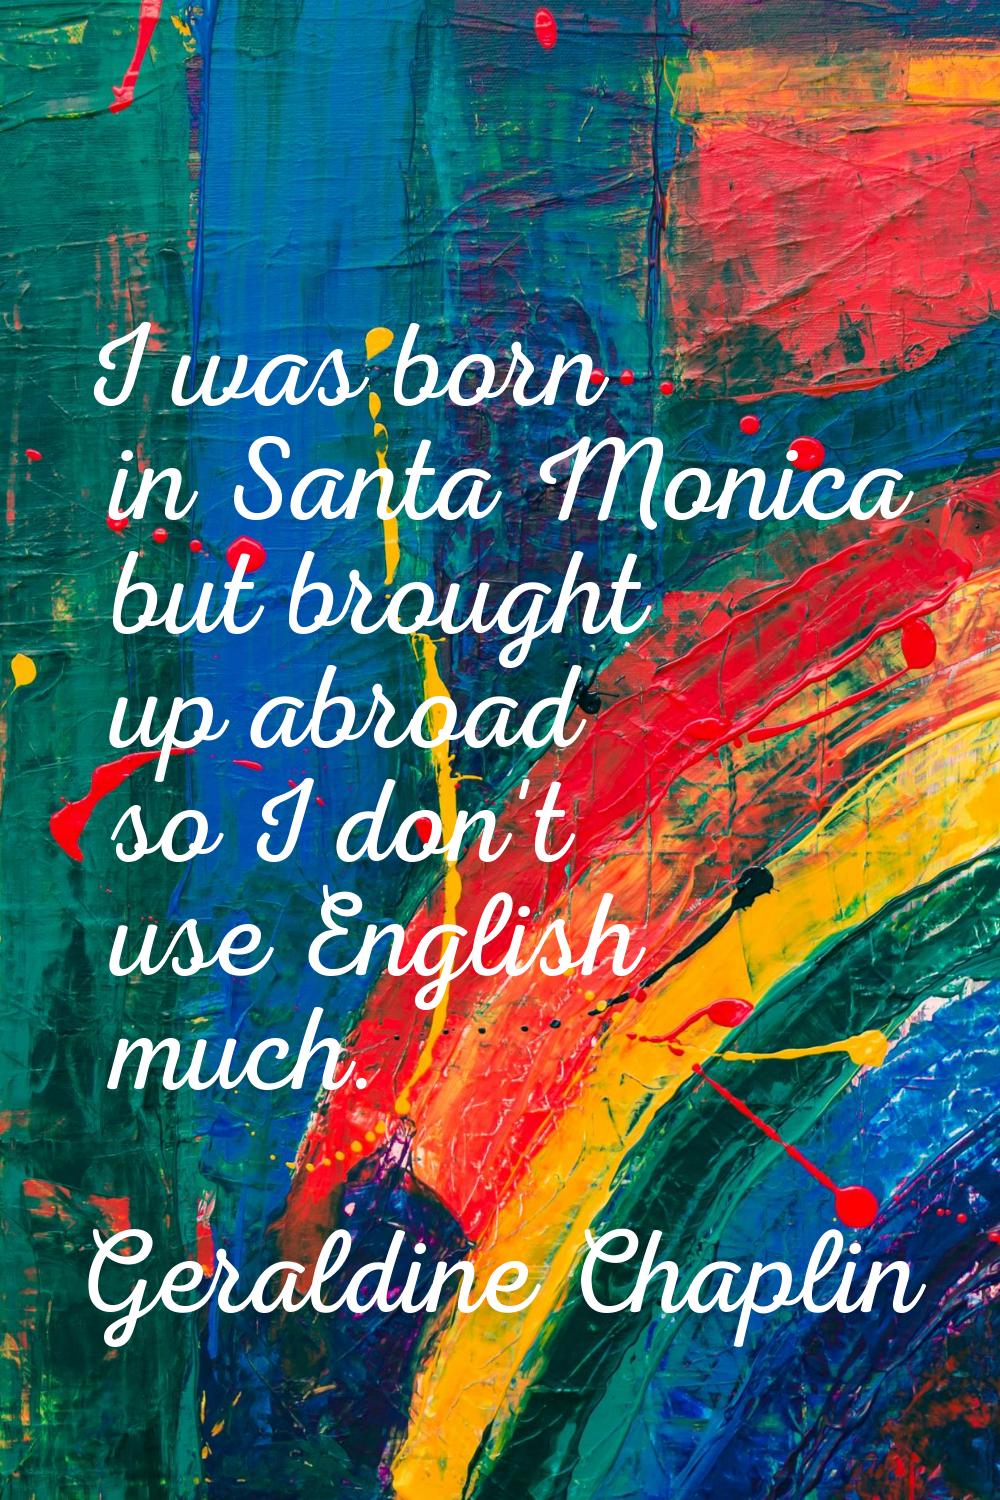 I was born in Santa Monica but brought up abroad so I don't use English much.